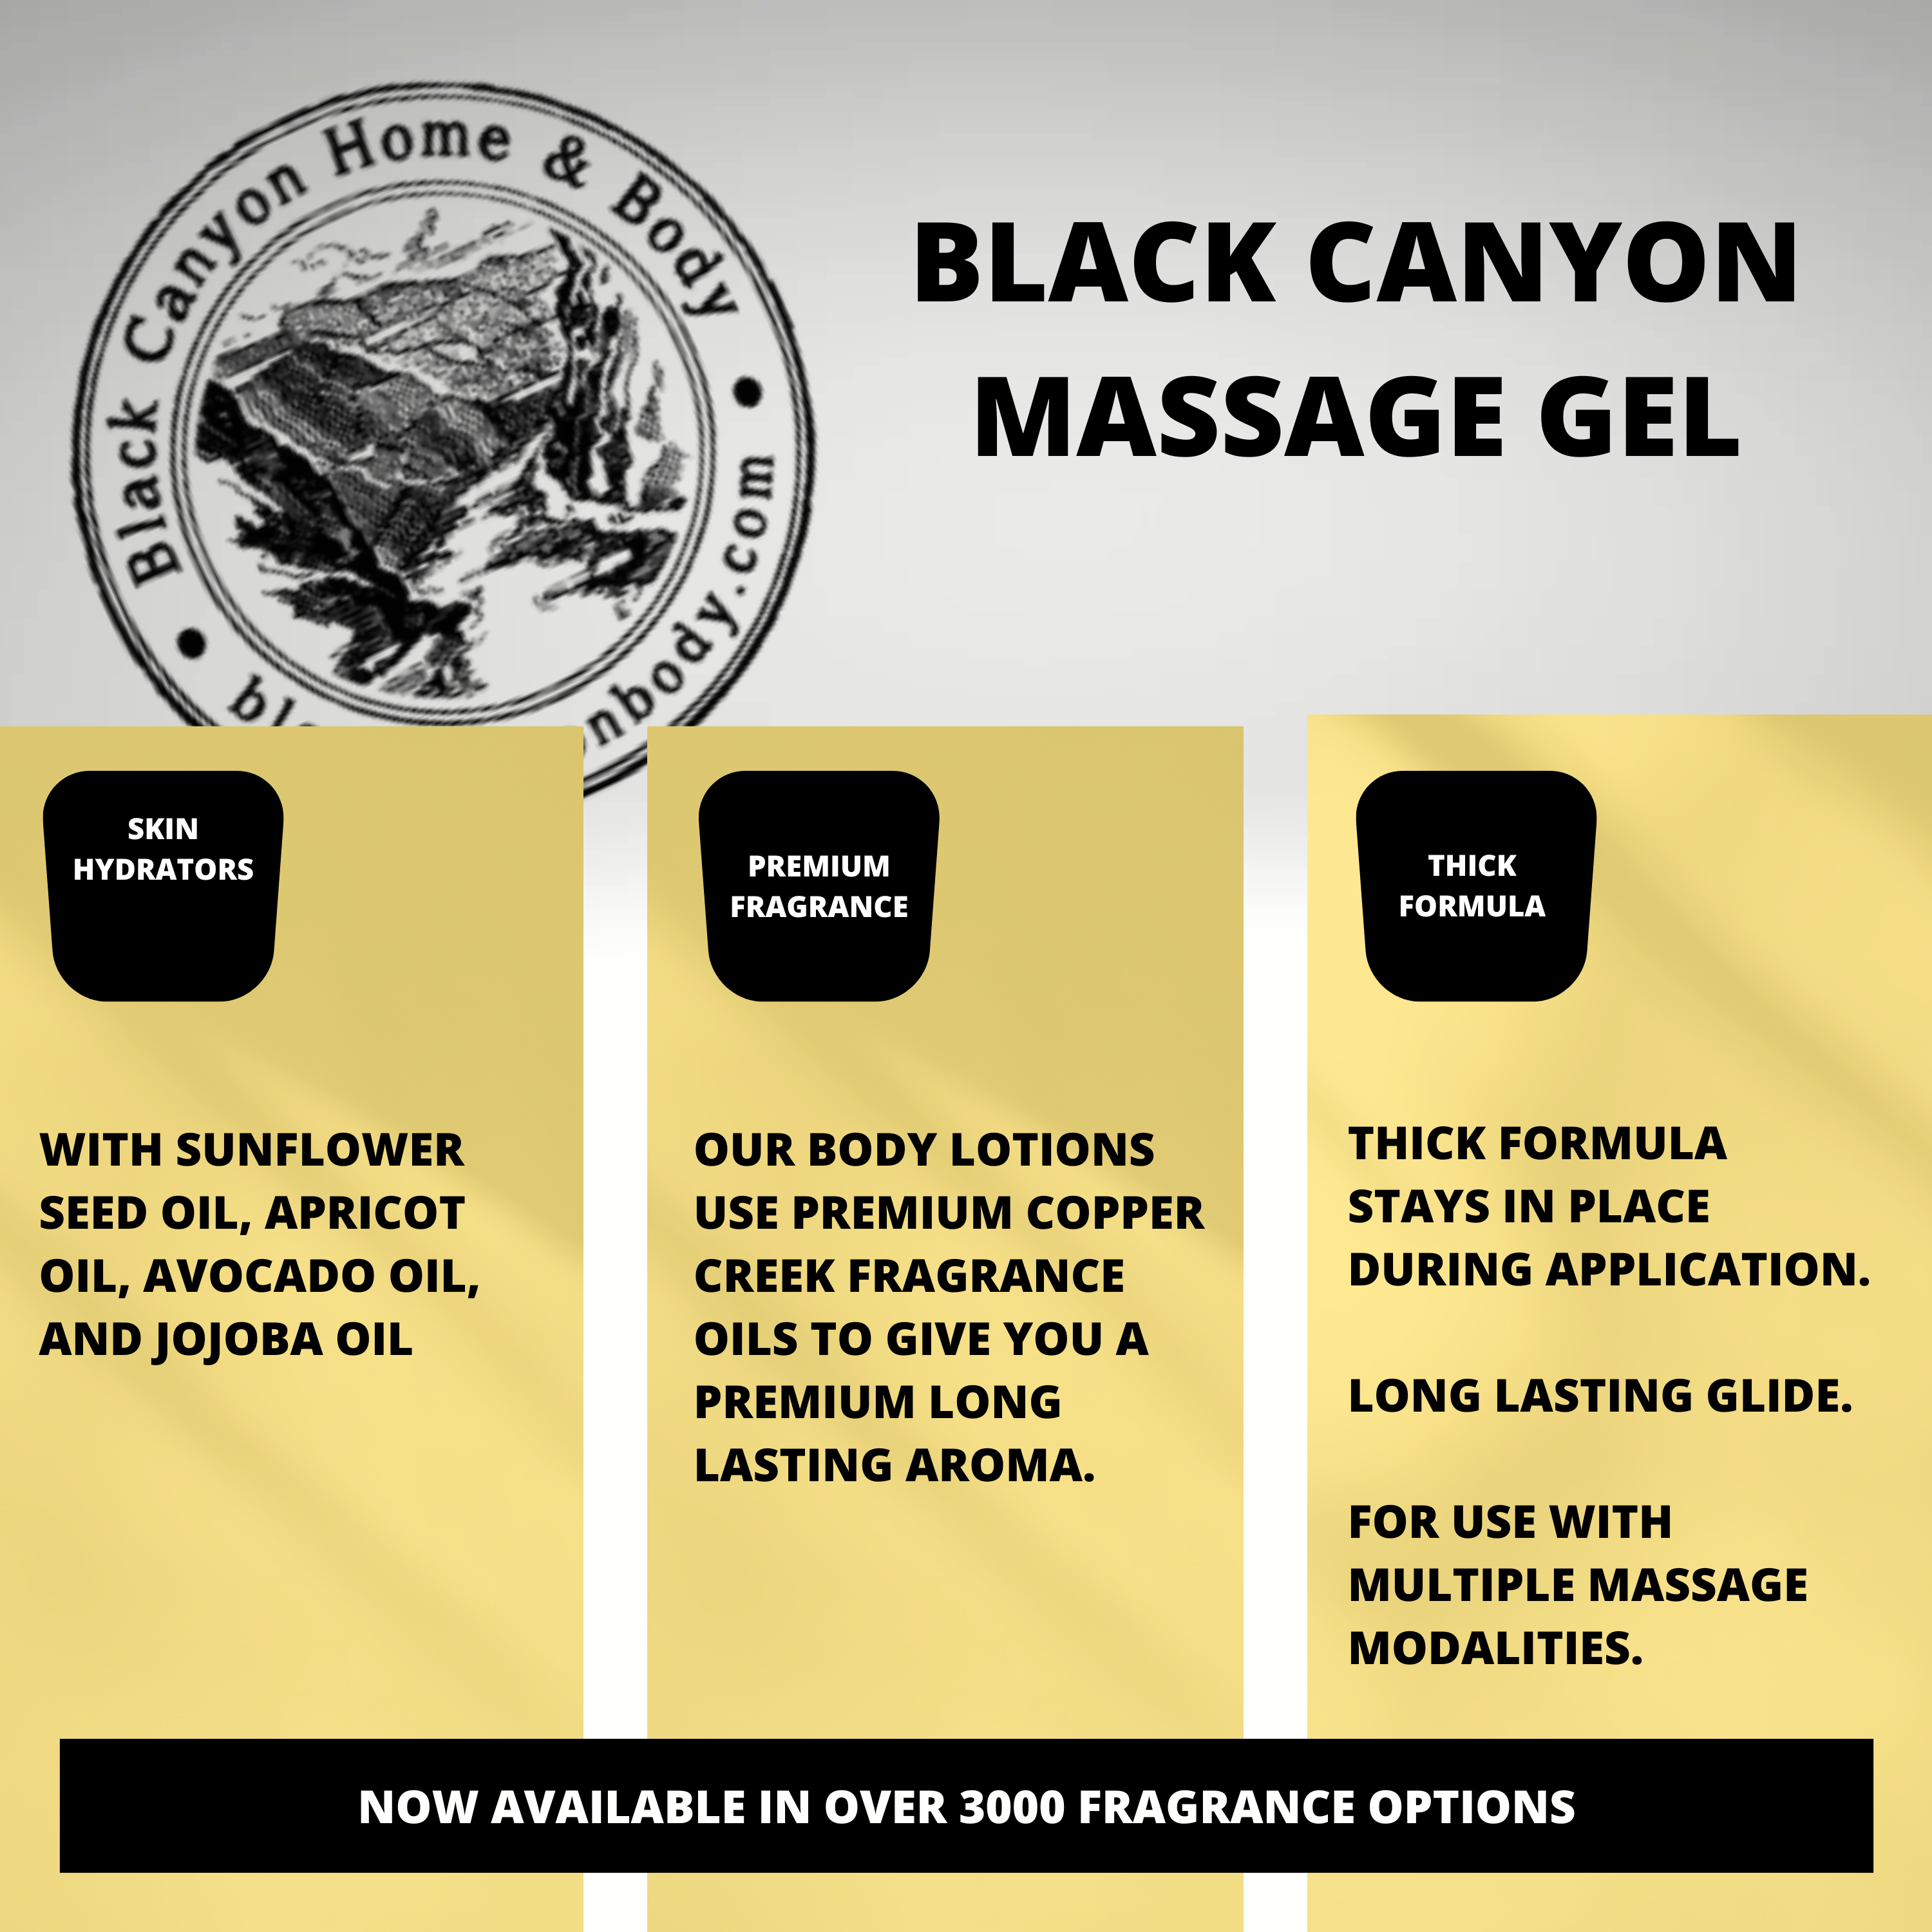 Black Canyon Cranberry Scented Massage Gel